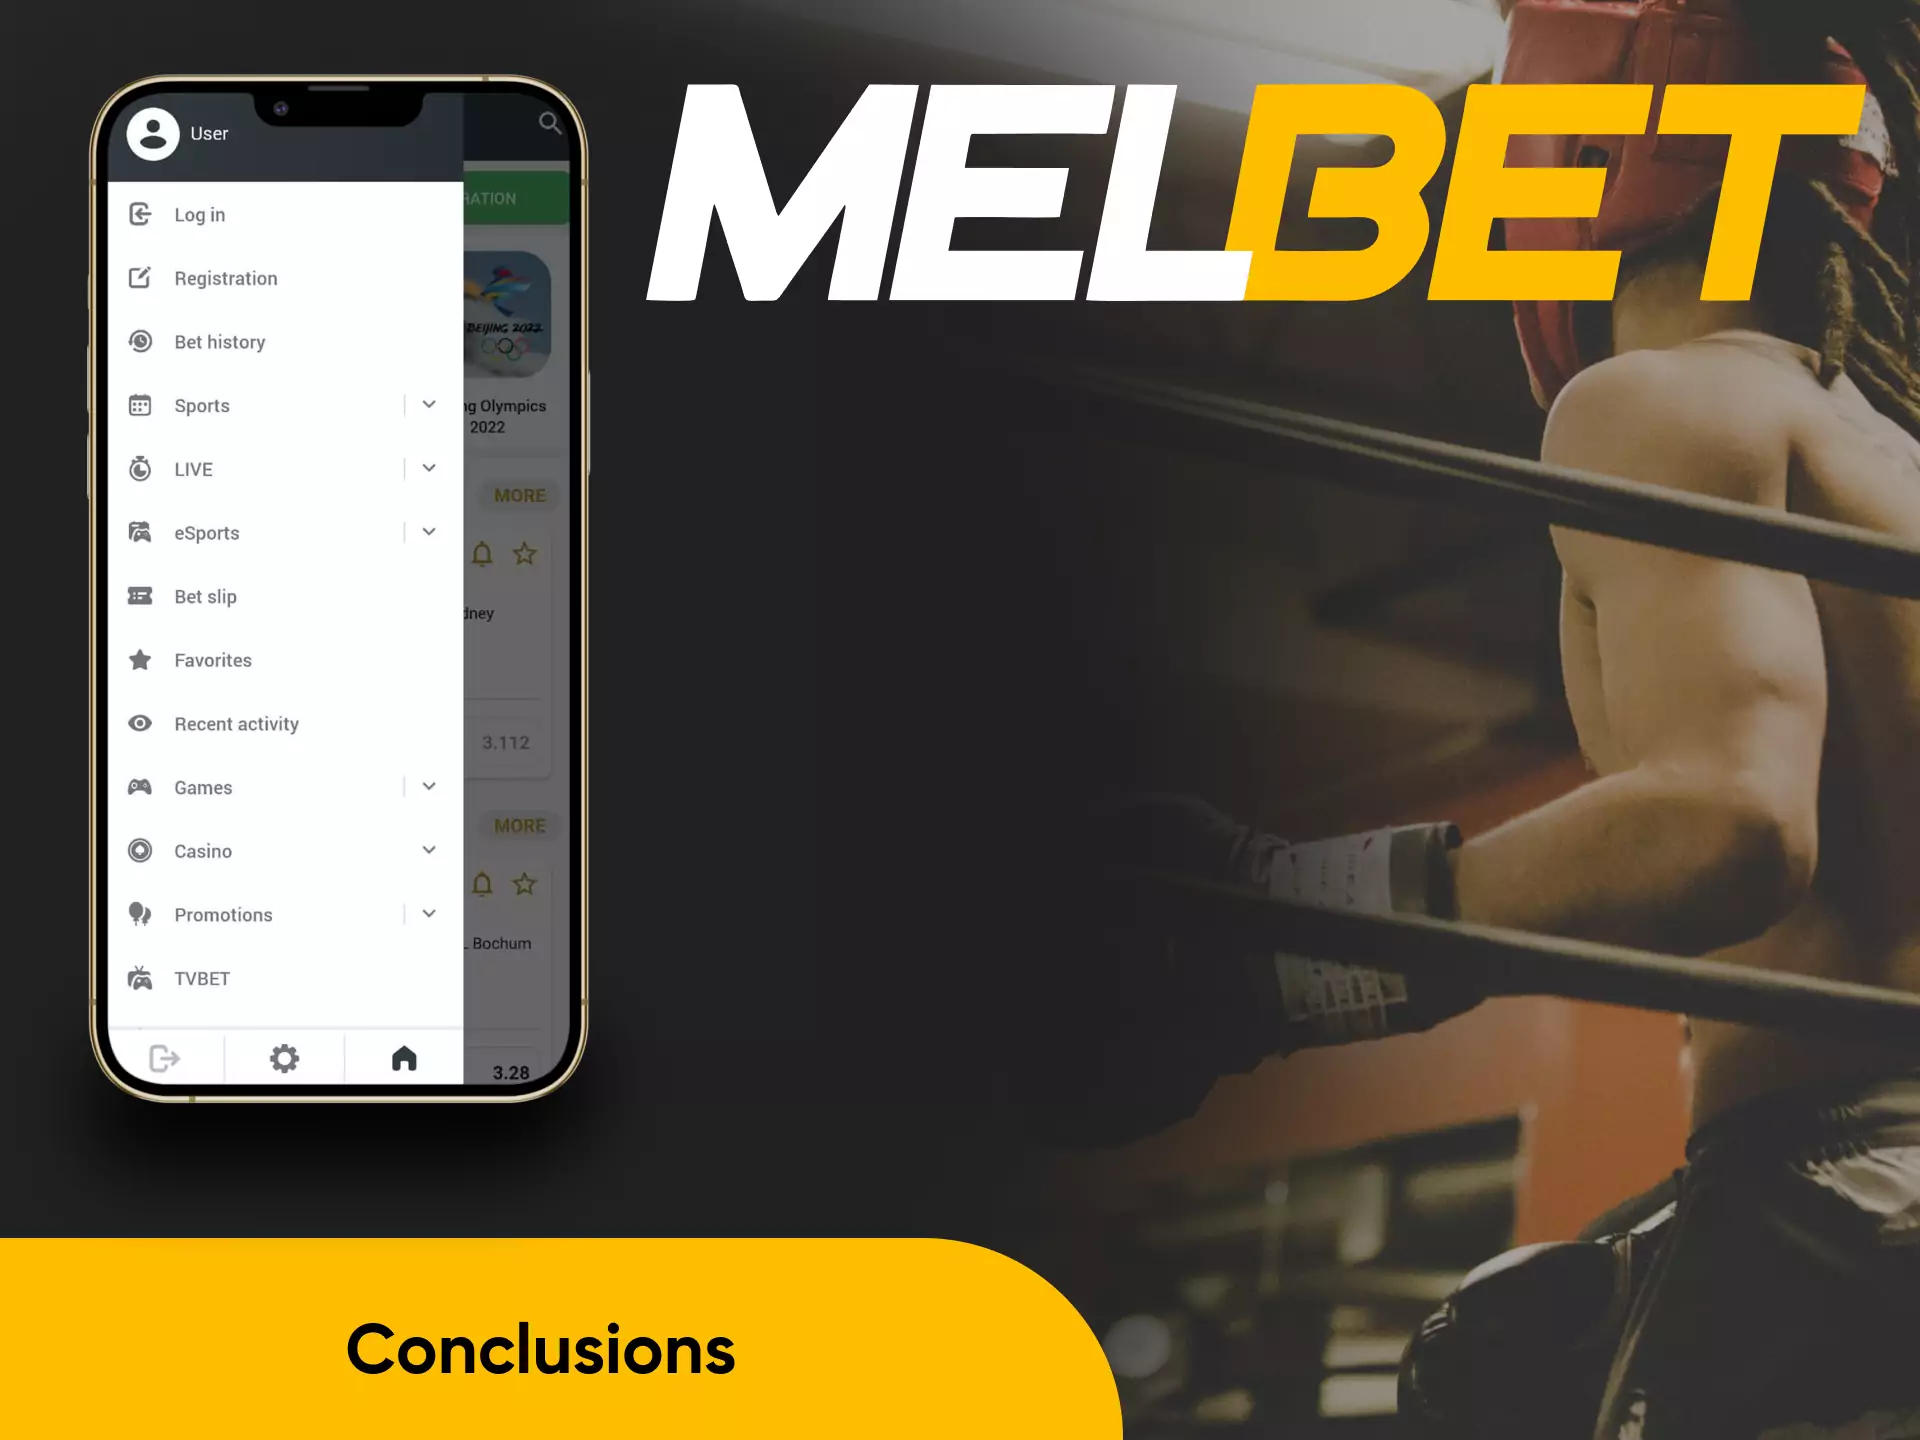 The Melbet app has great features for users who like betting and gambling.